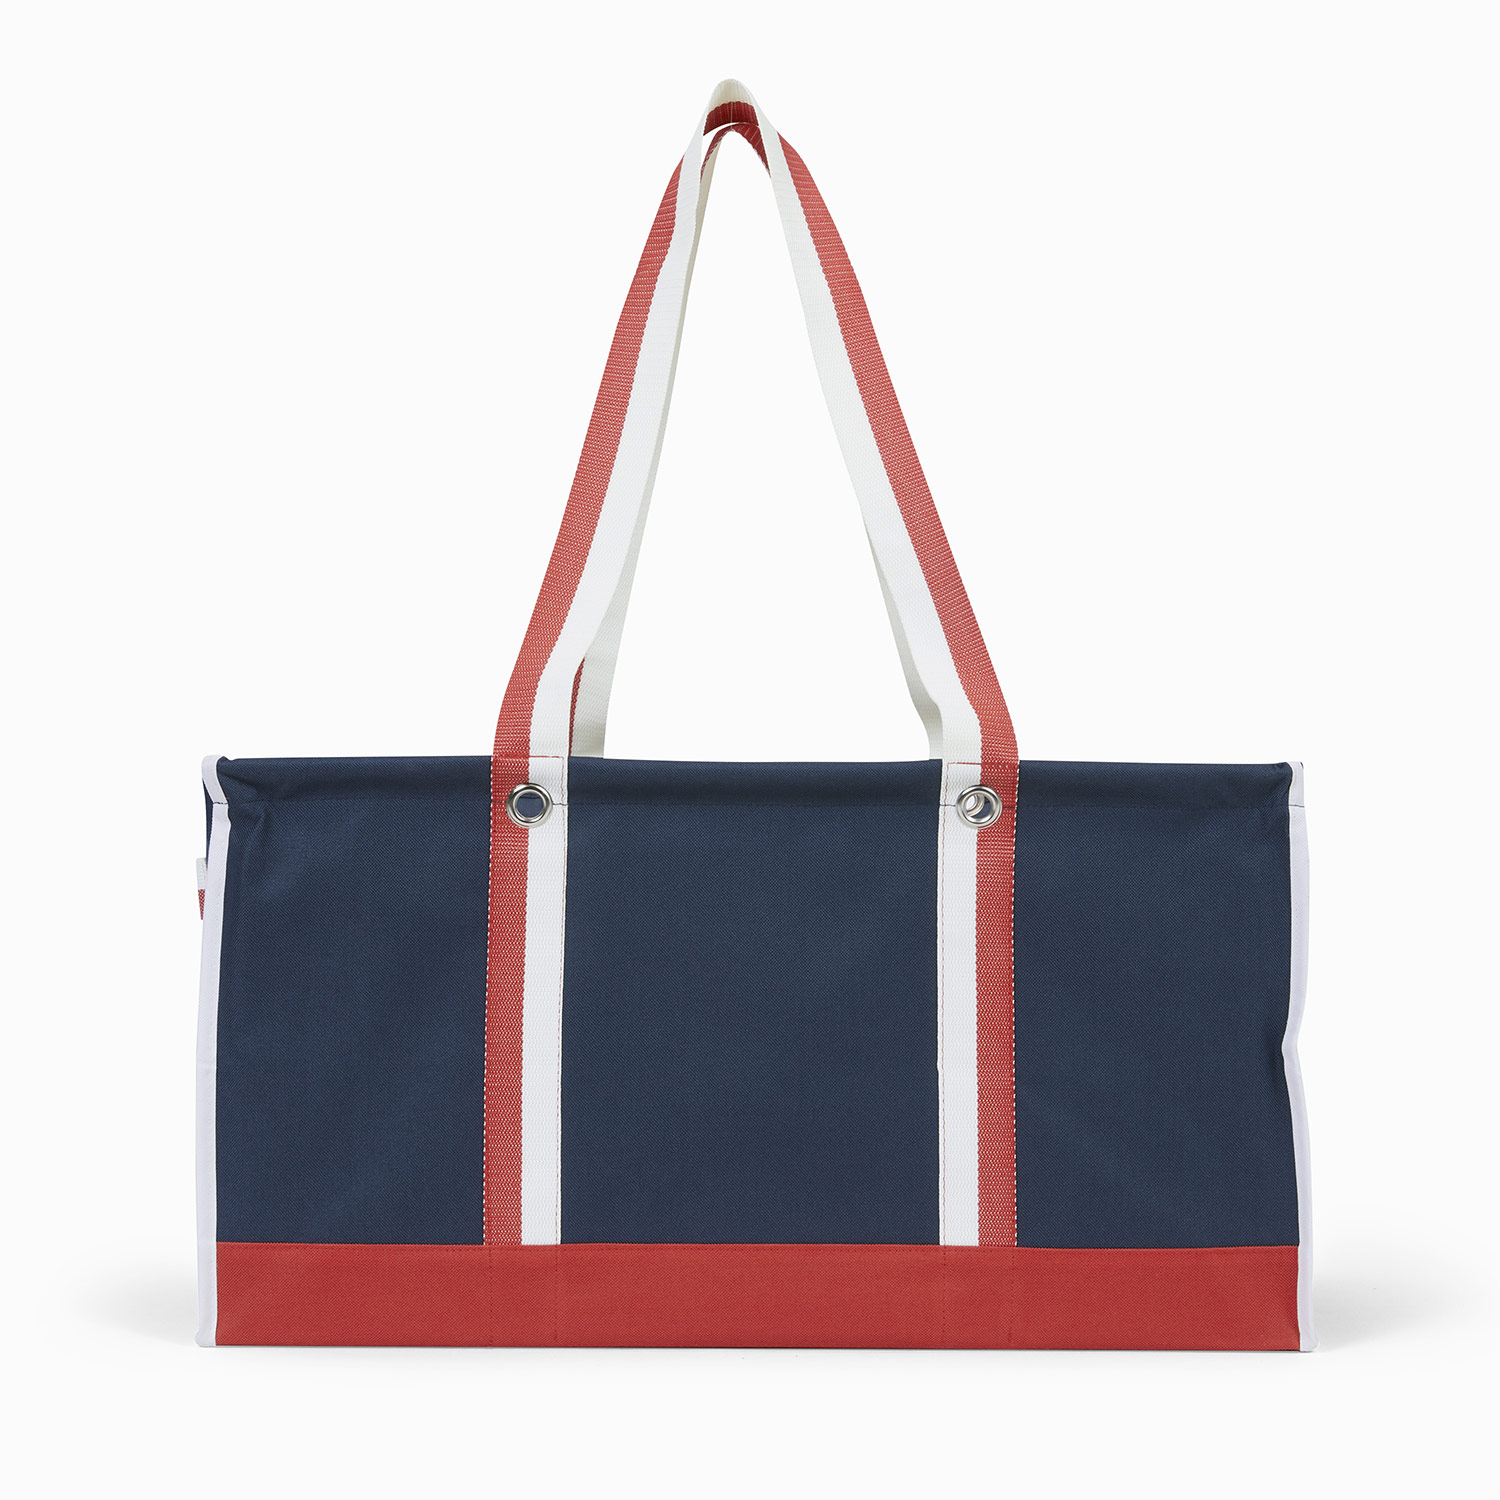 The Tote Collection 🌟Deluxe Utility Totes 🌟Large Utility Totes